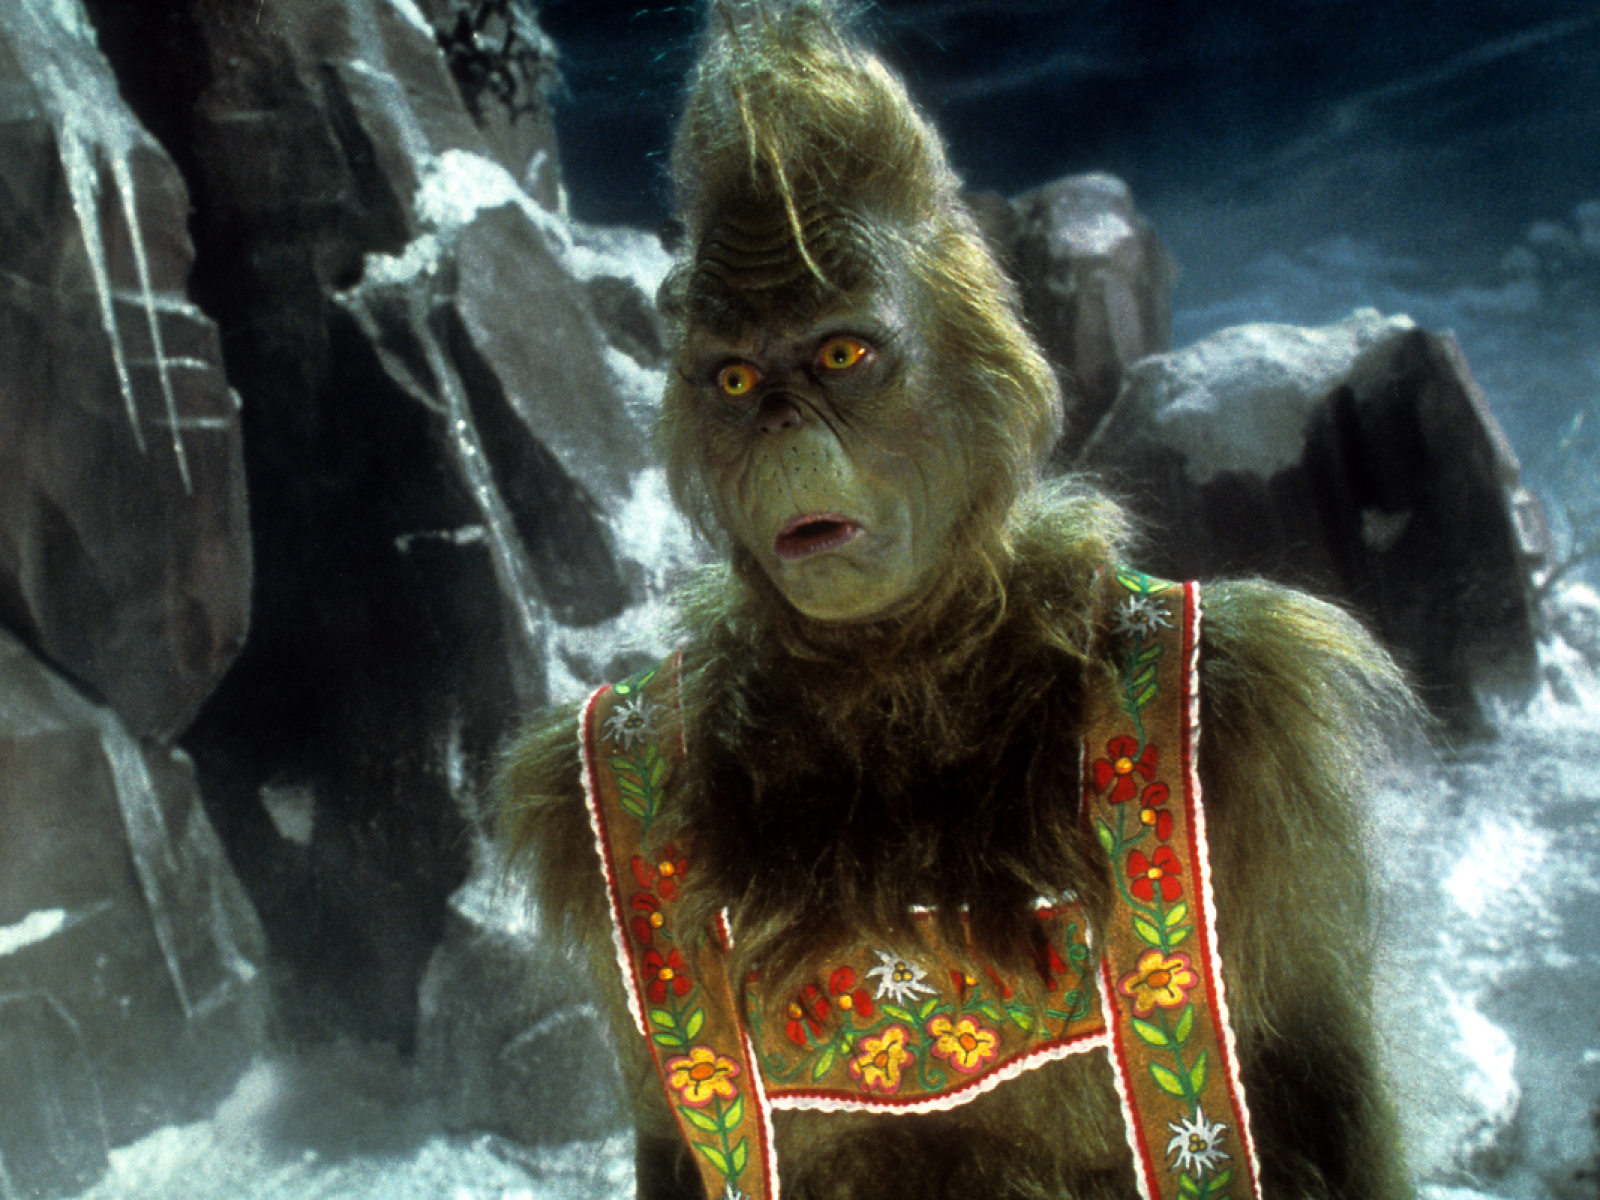 Did you know in the live action movie, the Grinch suit was made